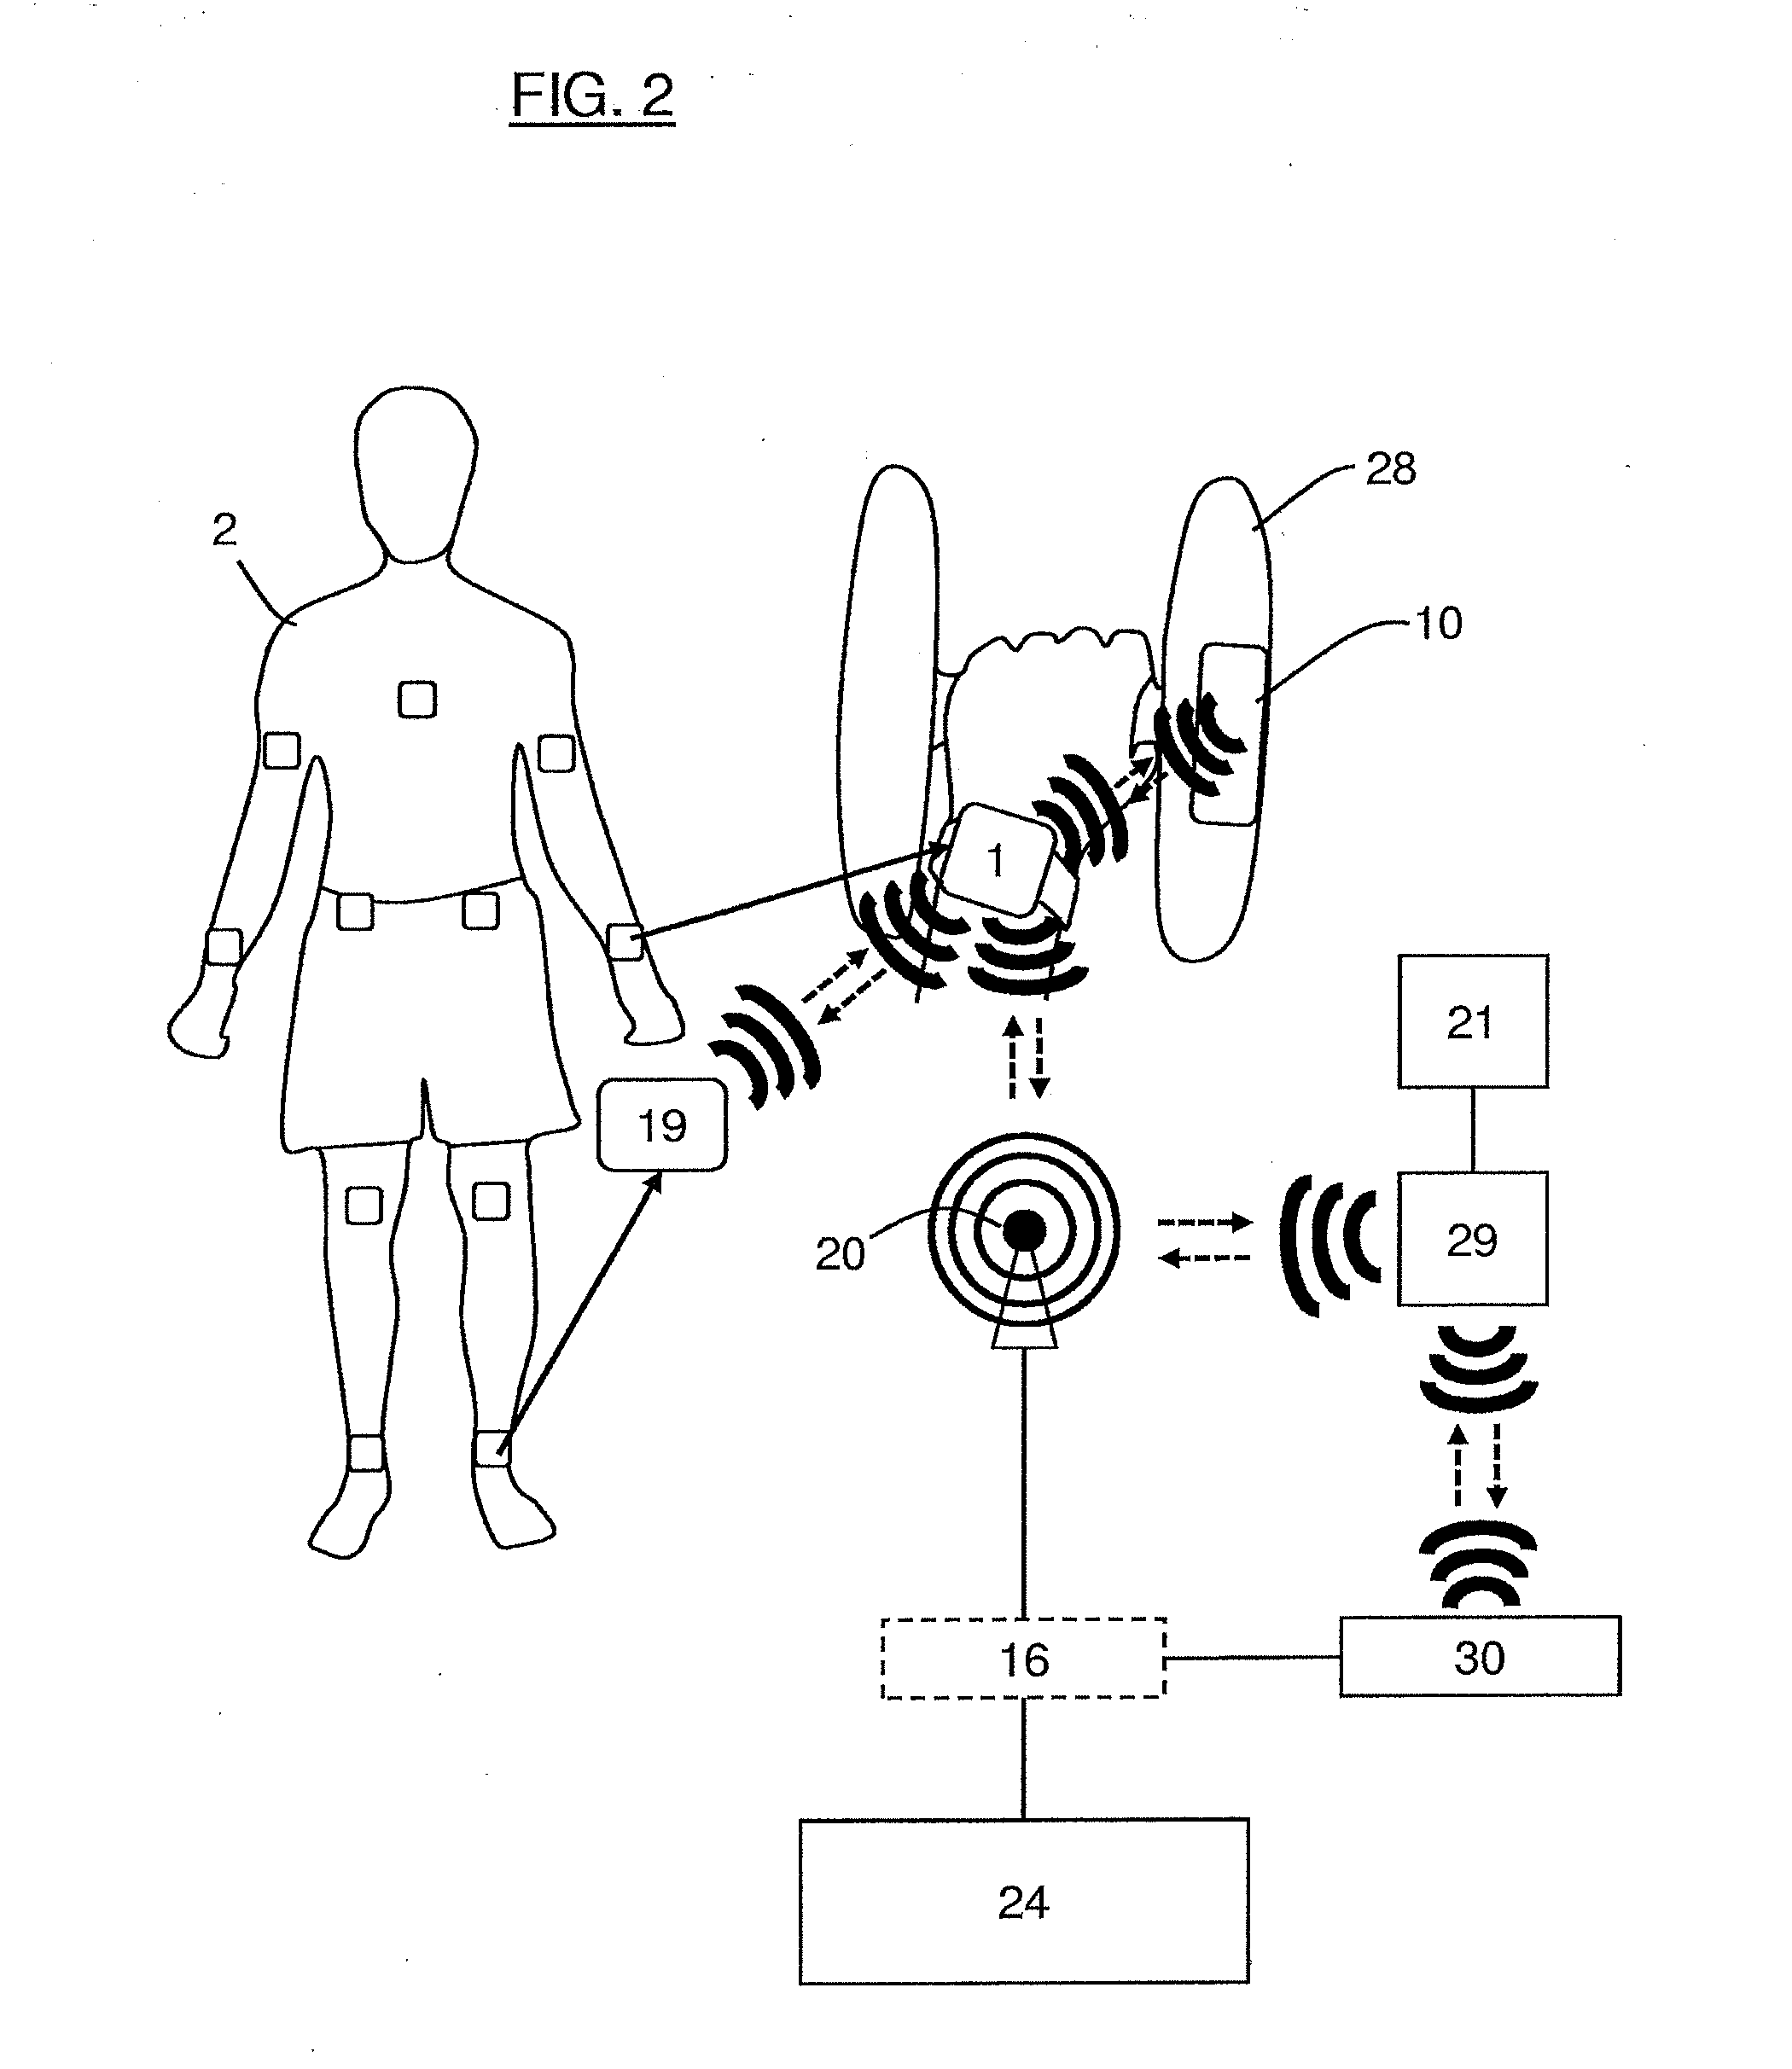 Method and device for mobile training data acquisition and analysis of strength training